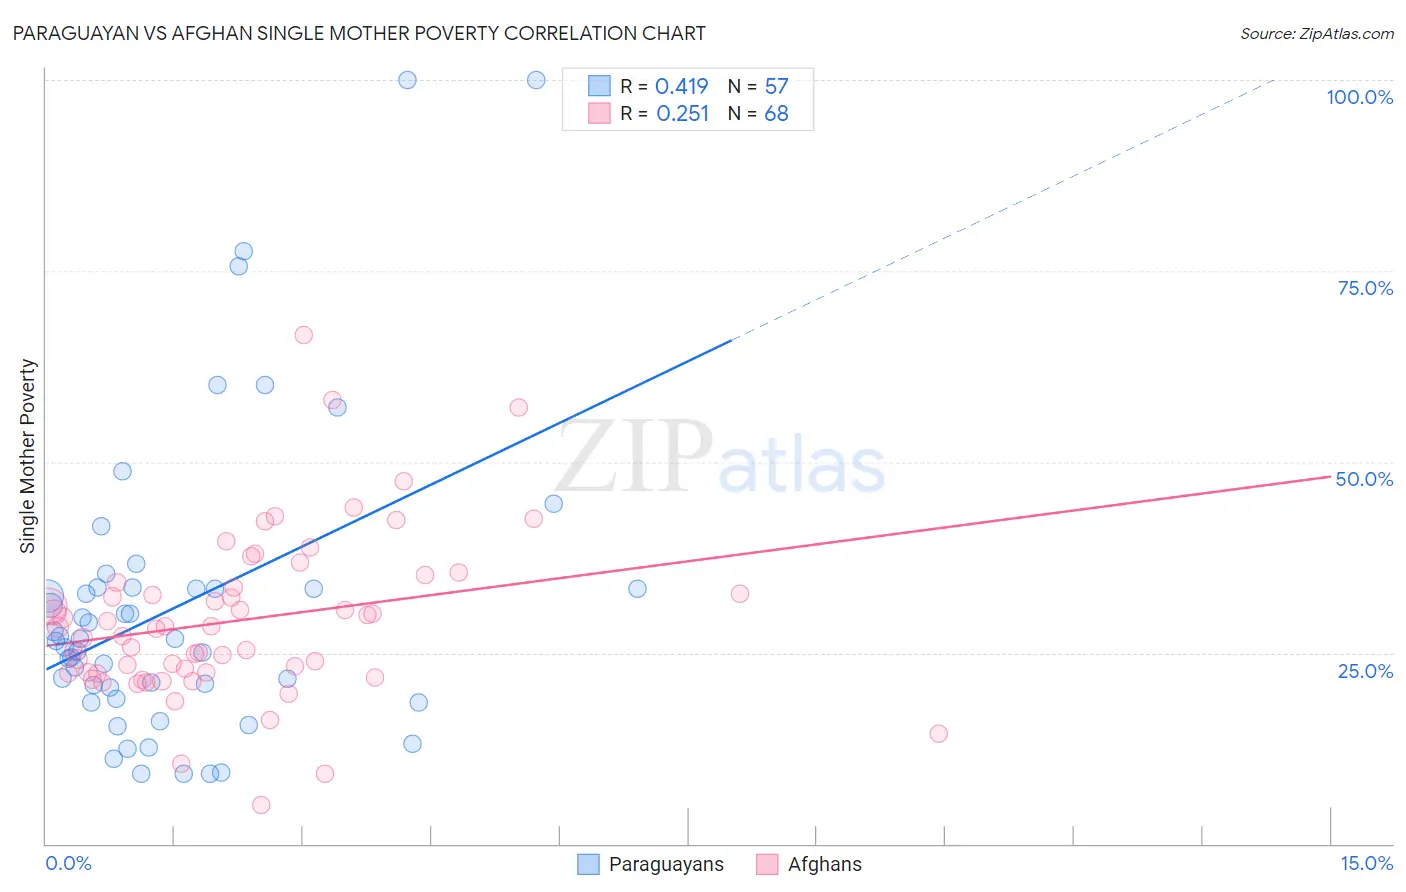 Paraguayan vs Afghan Single Mother Poverty